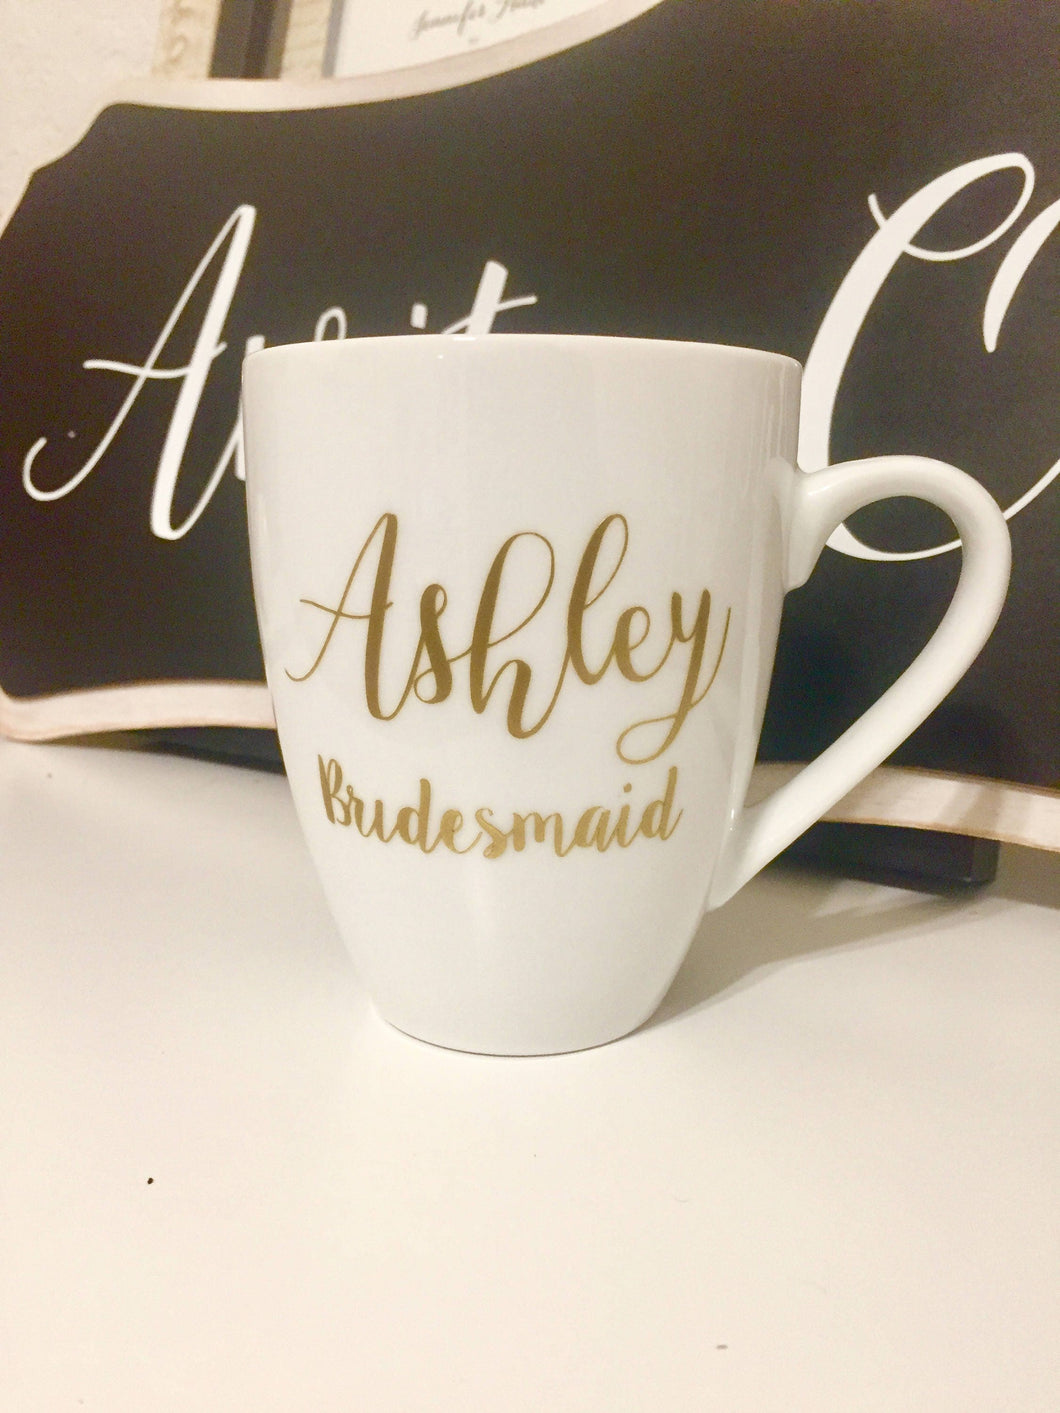 Clear glass mugs- personalized bridesmaid mugs- bridesmaid proposal - custom mug- bridesmaid gifts- gift for maid of honor proposal box gift